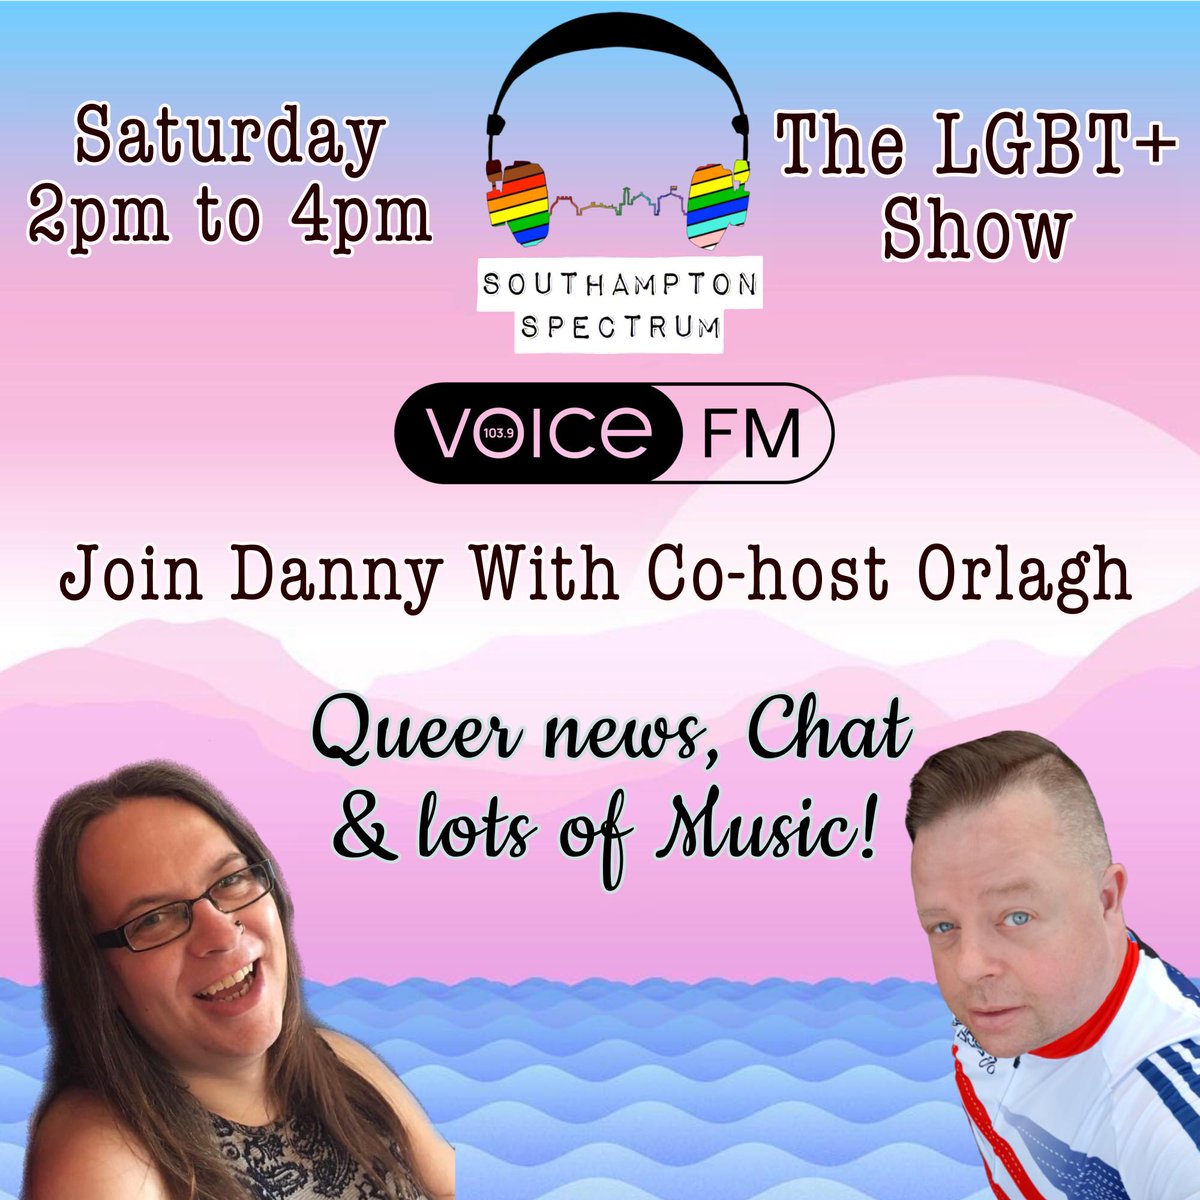 Join @r2danny2  and @LennieAuckland for today's show  from 2pm. The LGBTQIA+ show. With queer news, chat and lots of music. 

#lgbtqcommunity #LGBTQRights #LGBTQ #transrightsarehumanrights #TransRightsMatter  #TransWomenAreWomen #TransMenAreMen